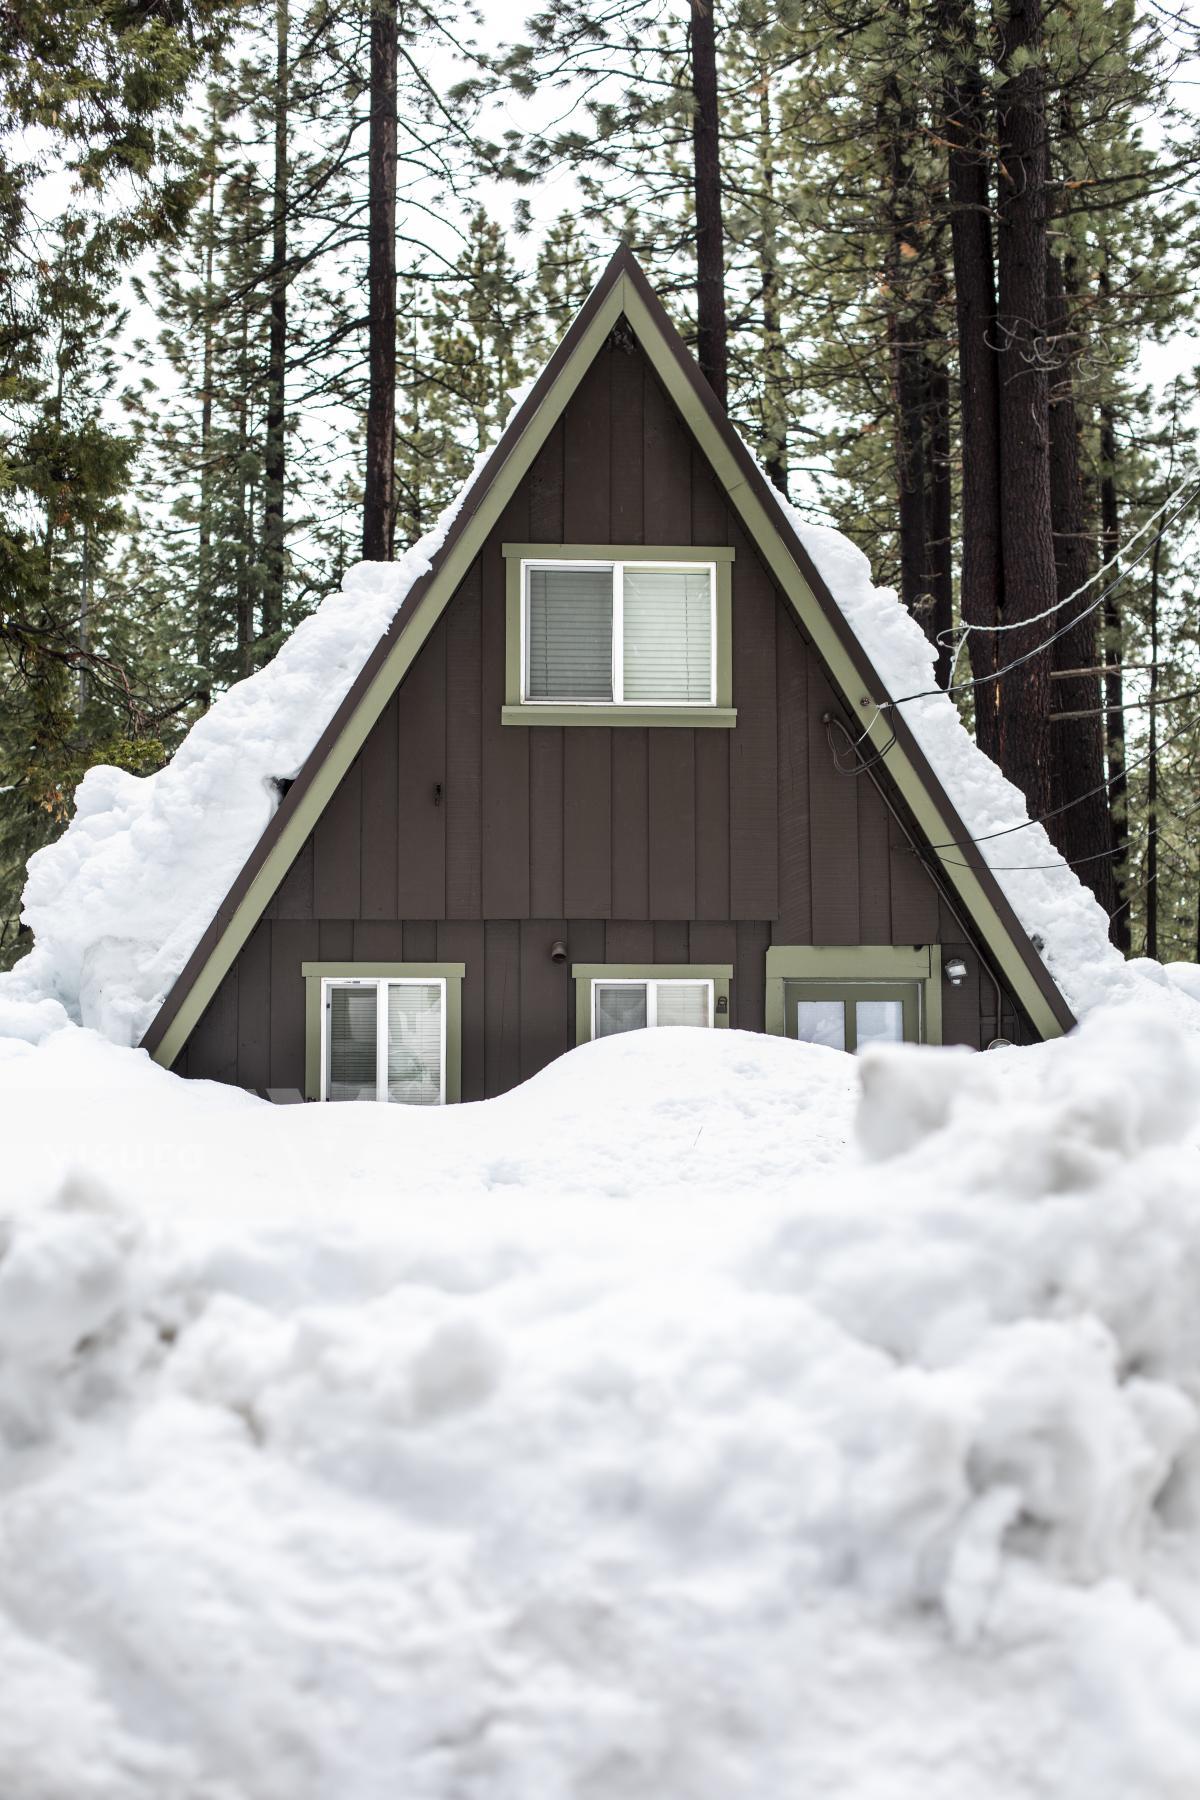 Purchase Another Atmospheric River Dumps More Snow on Lake Tahoe Region by Katie Linsky Shaw